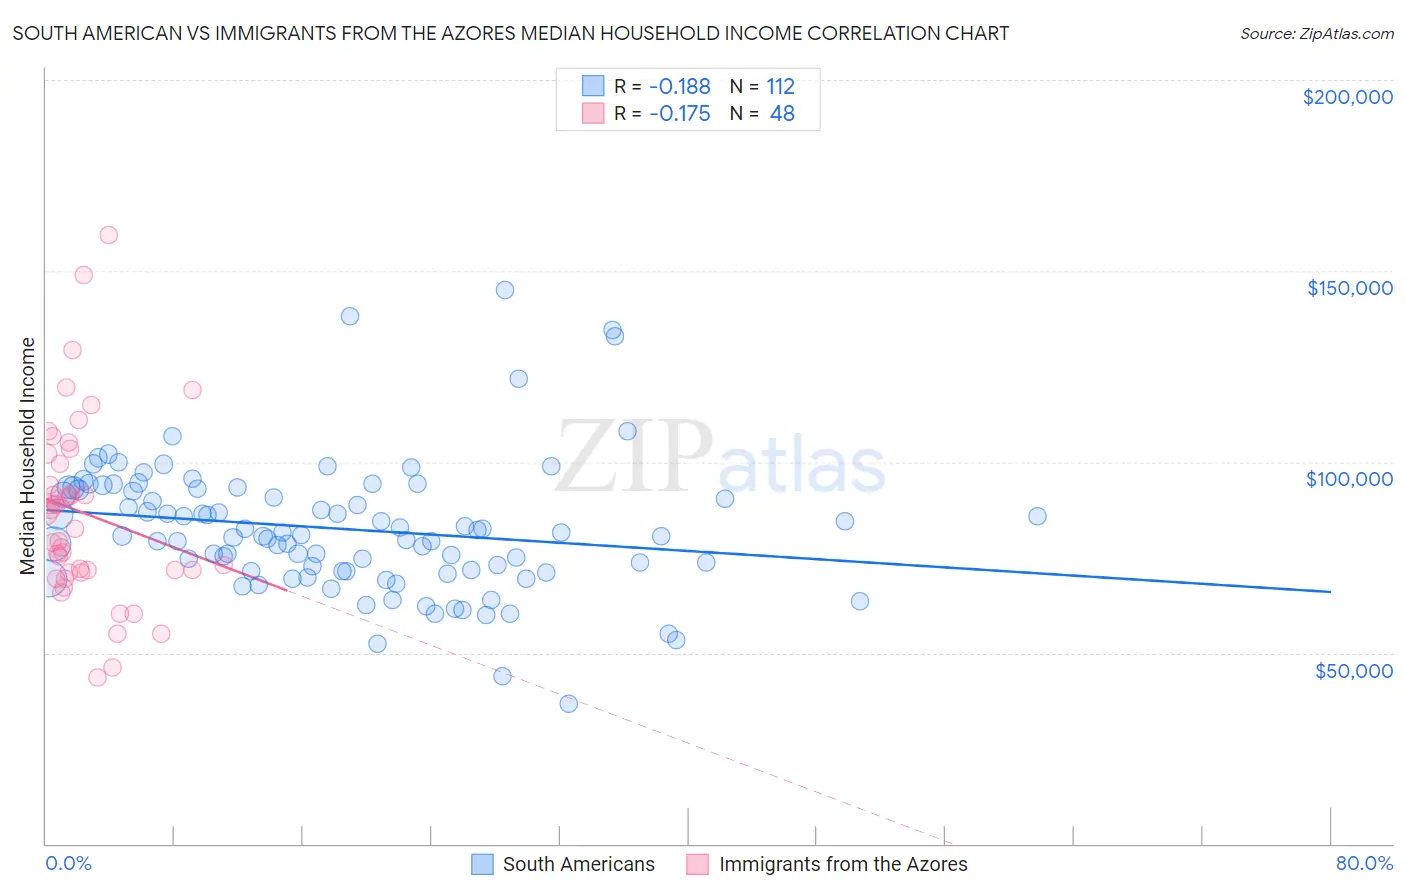 South American vs Immigrants from the Azores Median Household Income